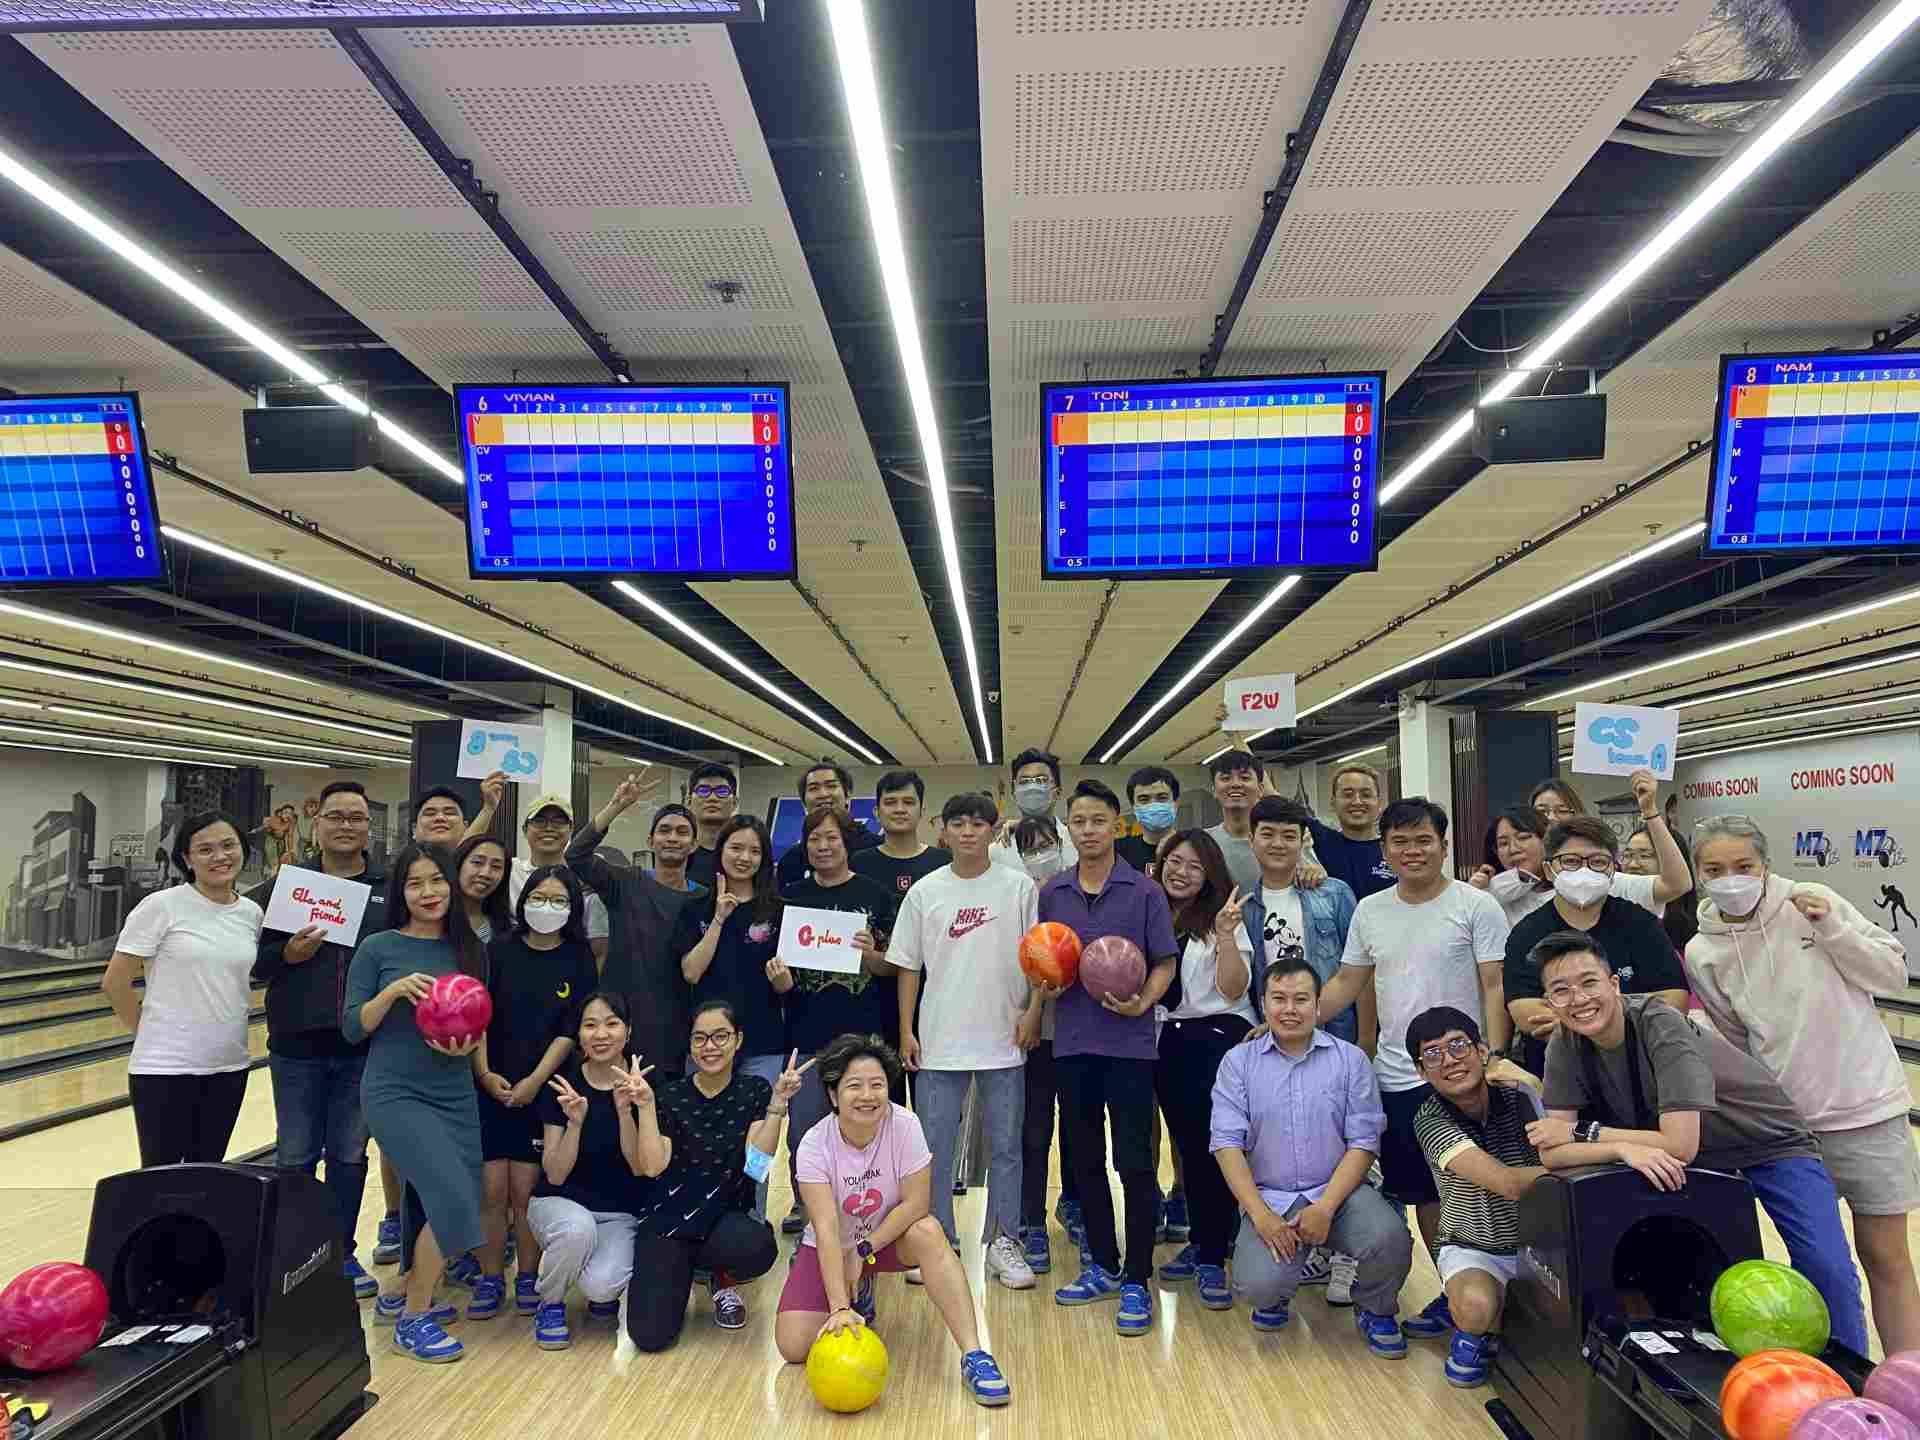 Innovature BPO bonding activity: Bowling Competition